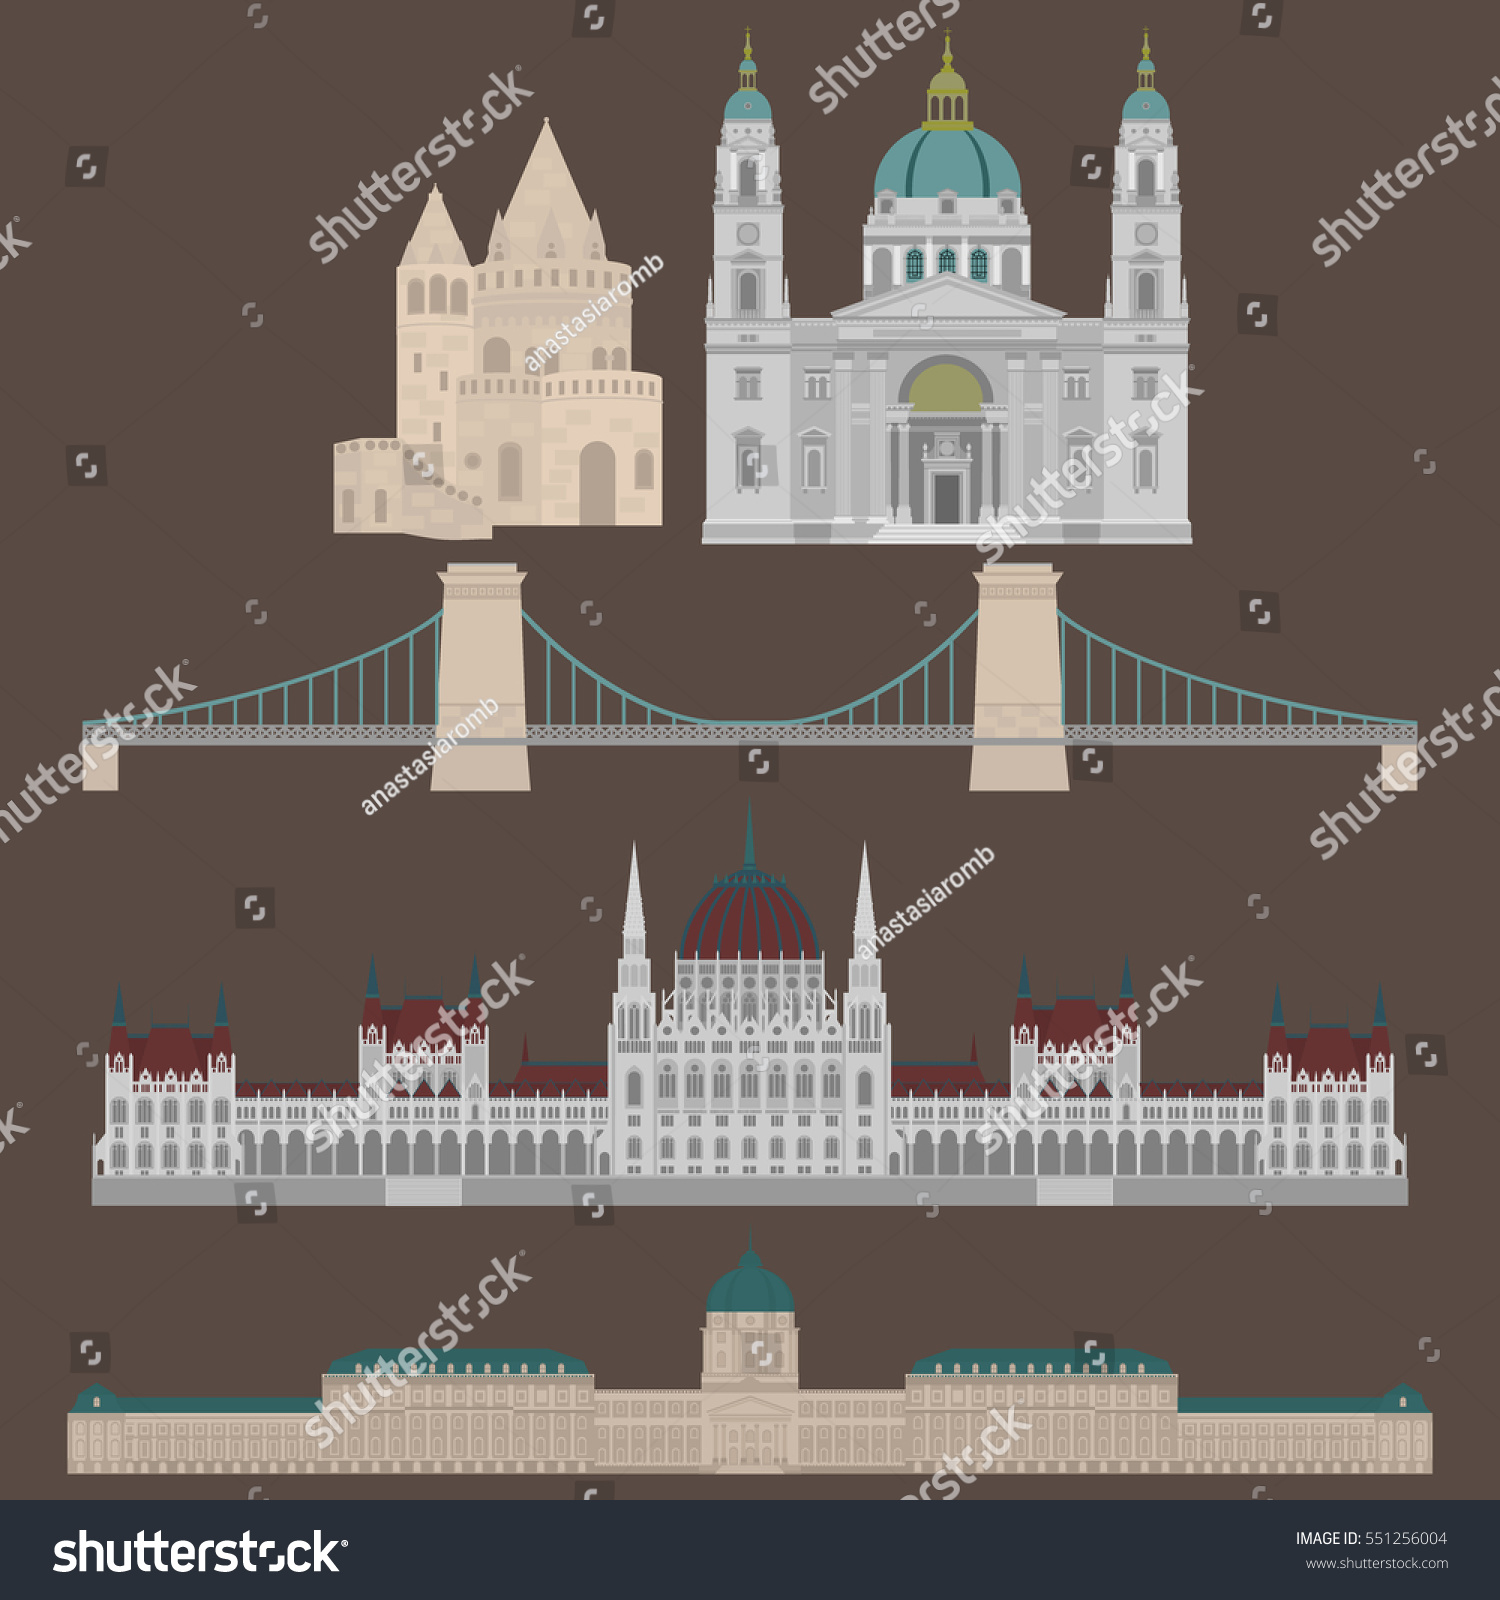 SVG of Hungarian City sights in Budapest. Hungary Landmark Global Travel And Journey Architecture Elements Buda castle, Chain Bridge. Budapest parliament, Fisherman's bastion, St. Istvan basilica svg